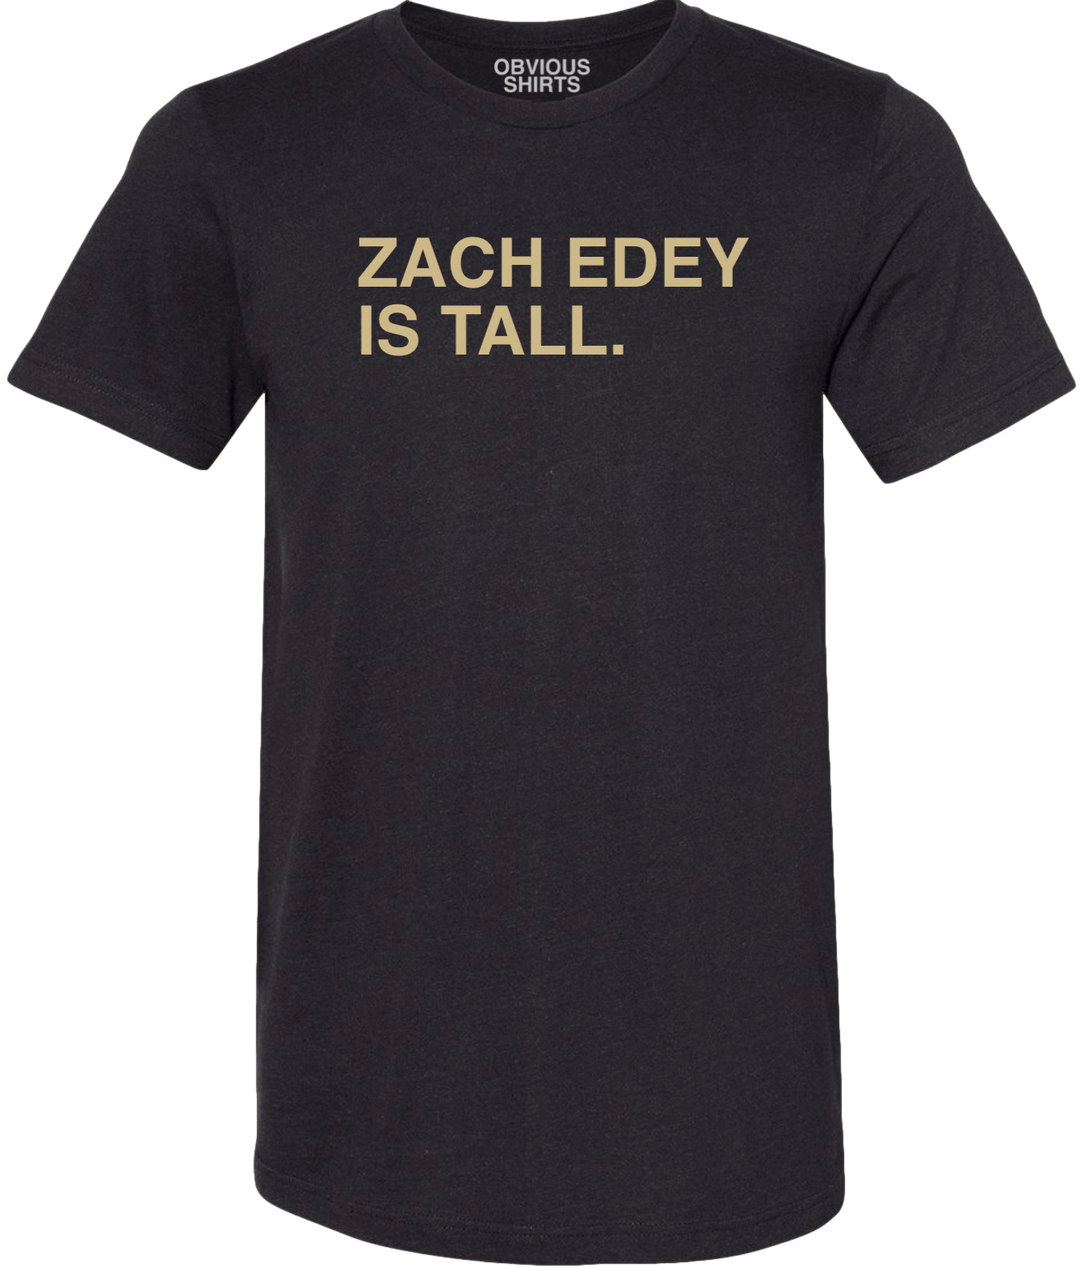 ZACH EDEY IS TALL. - OBVIOUS SHIRTS